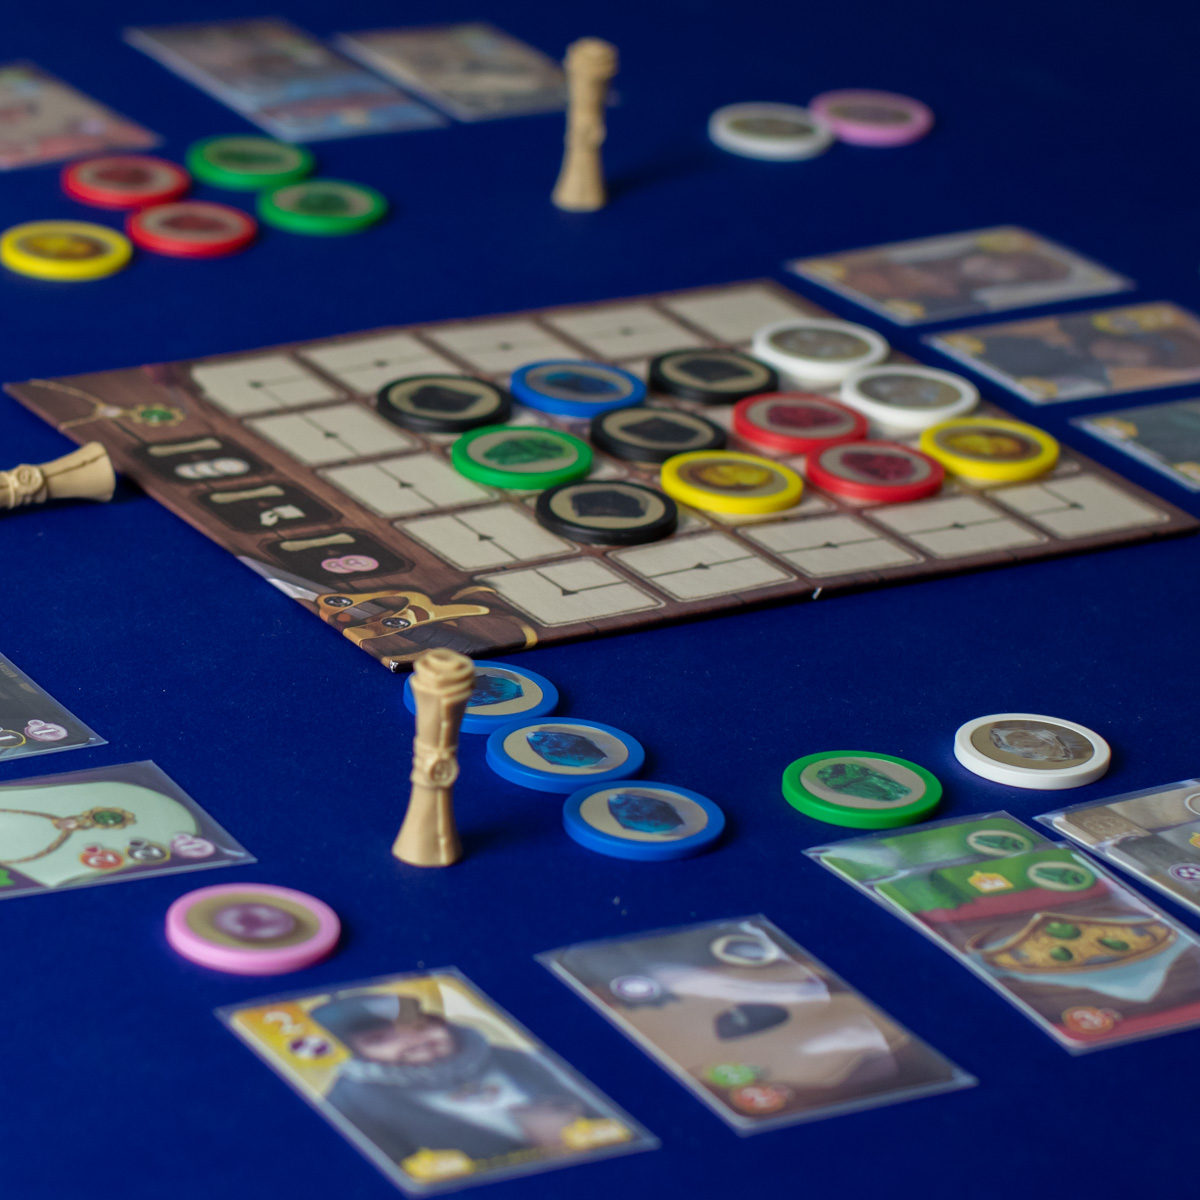 How to play Splendor: board game's rules, setup and scoring